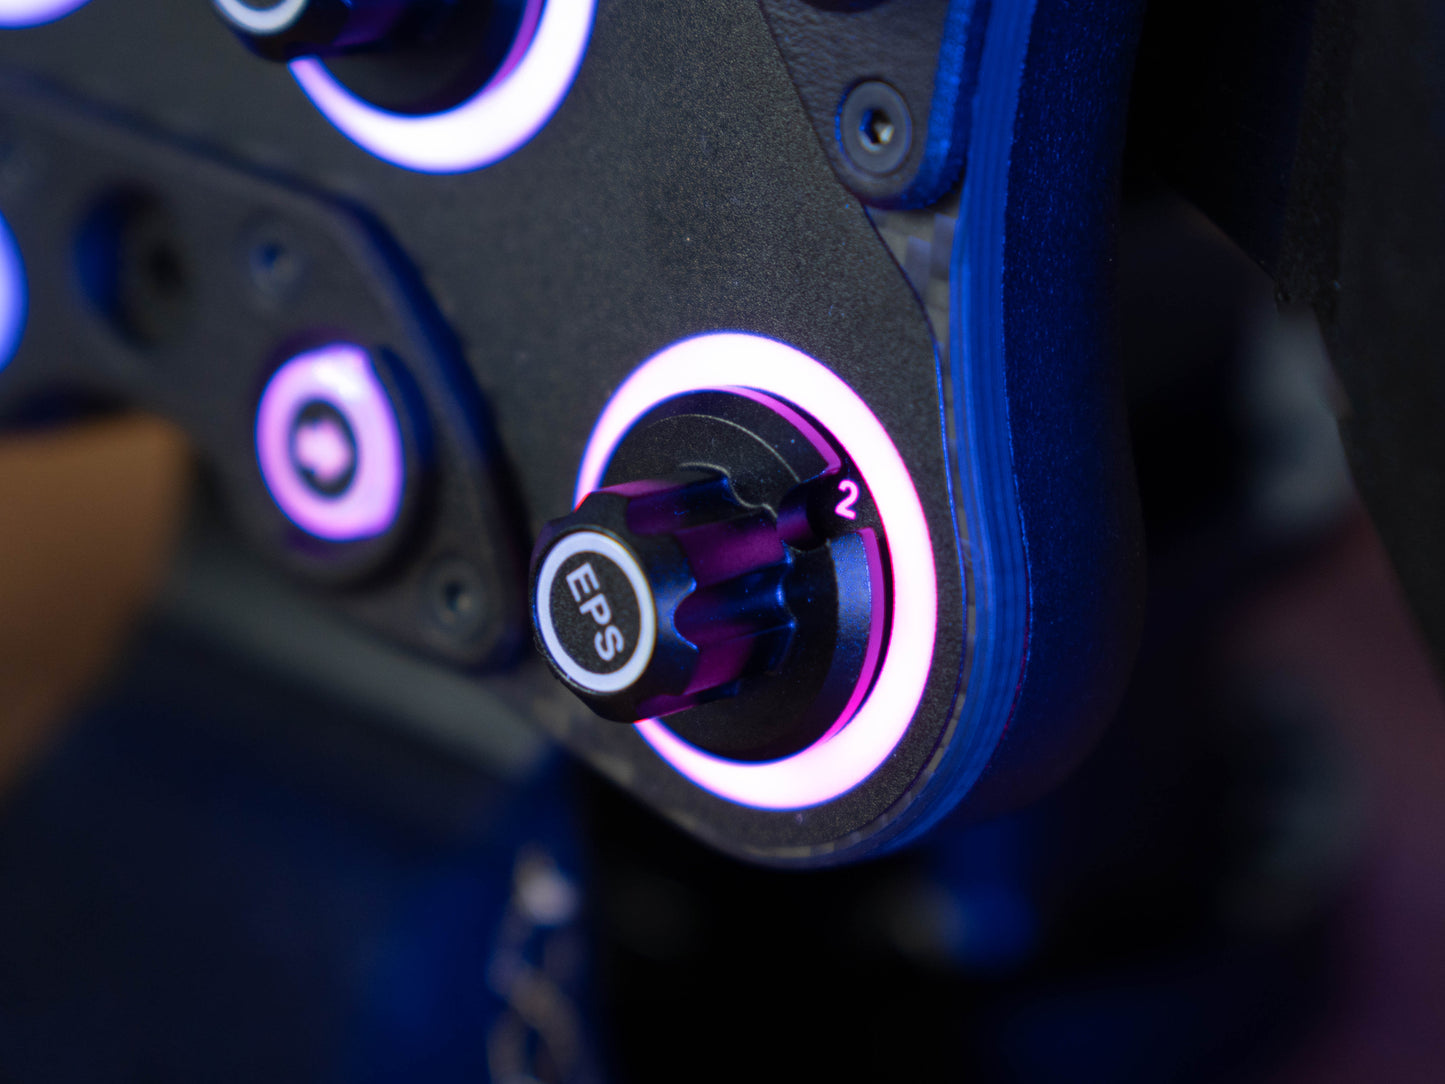 RGB Rotary encoders on the most universal button box for sim racing